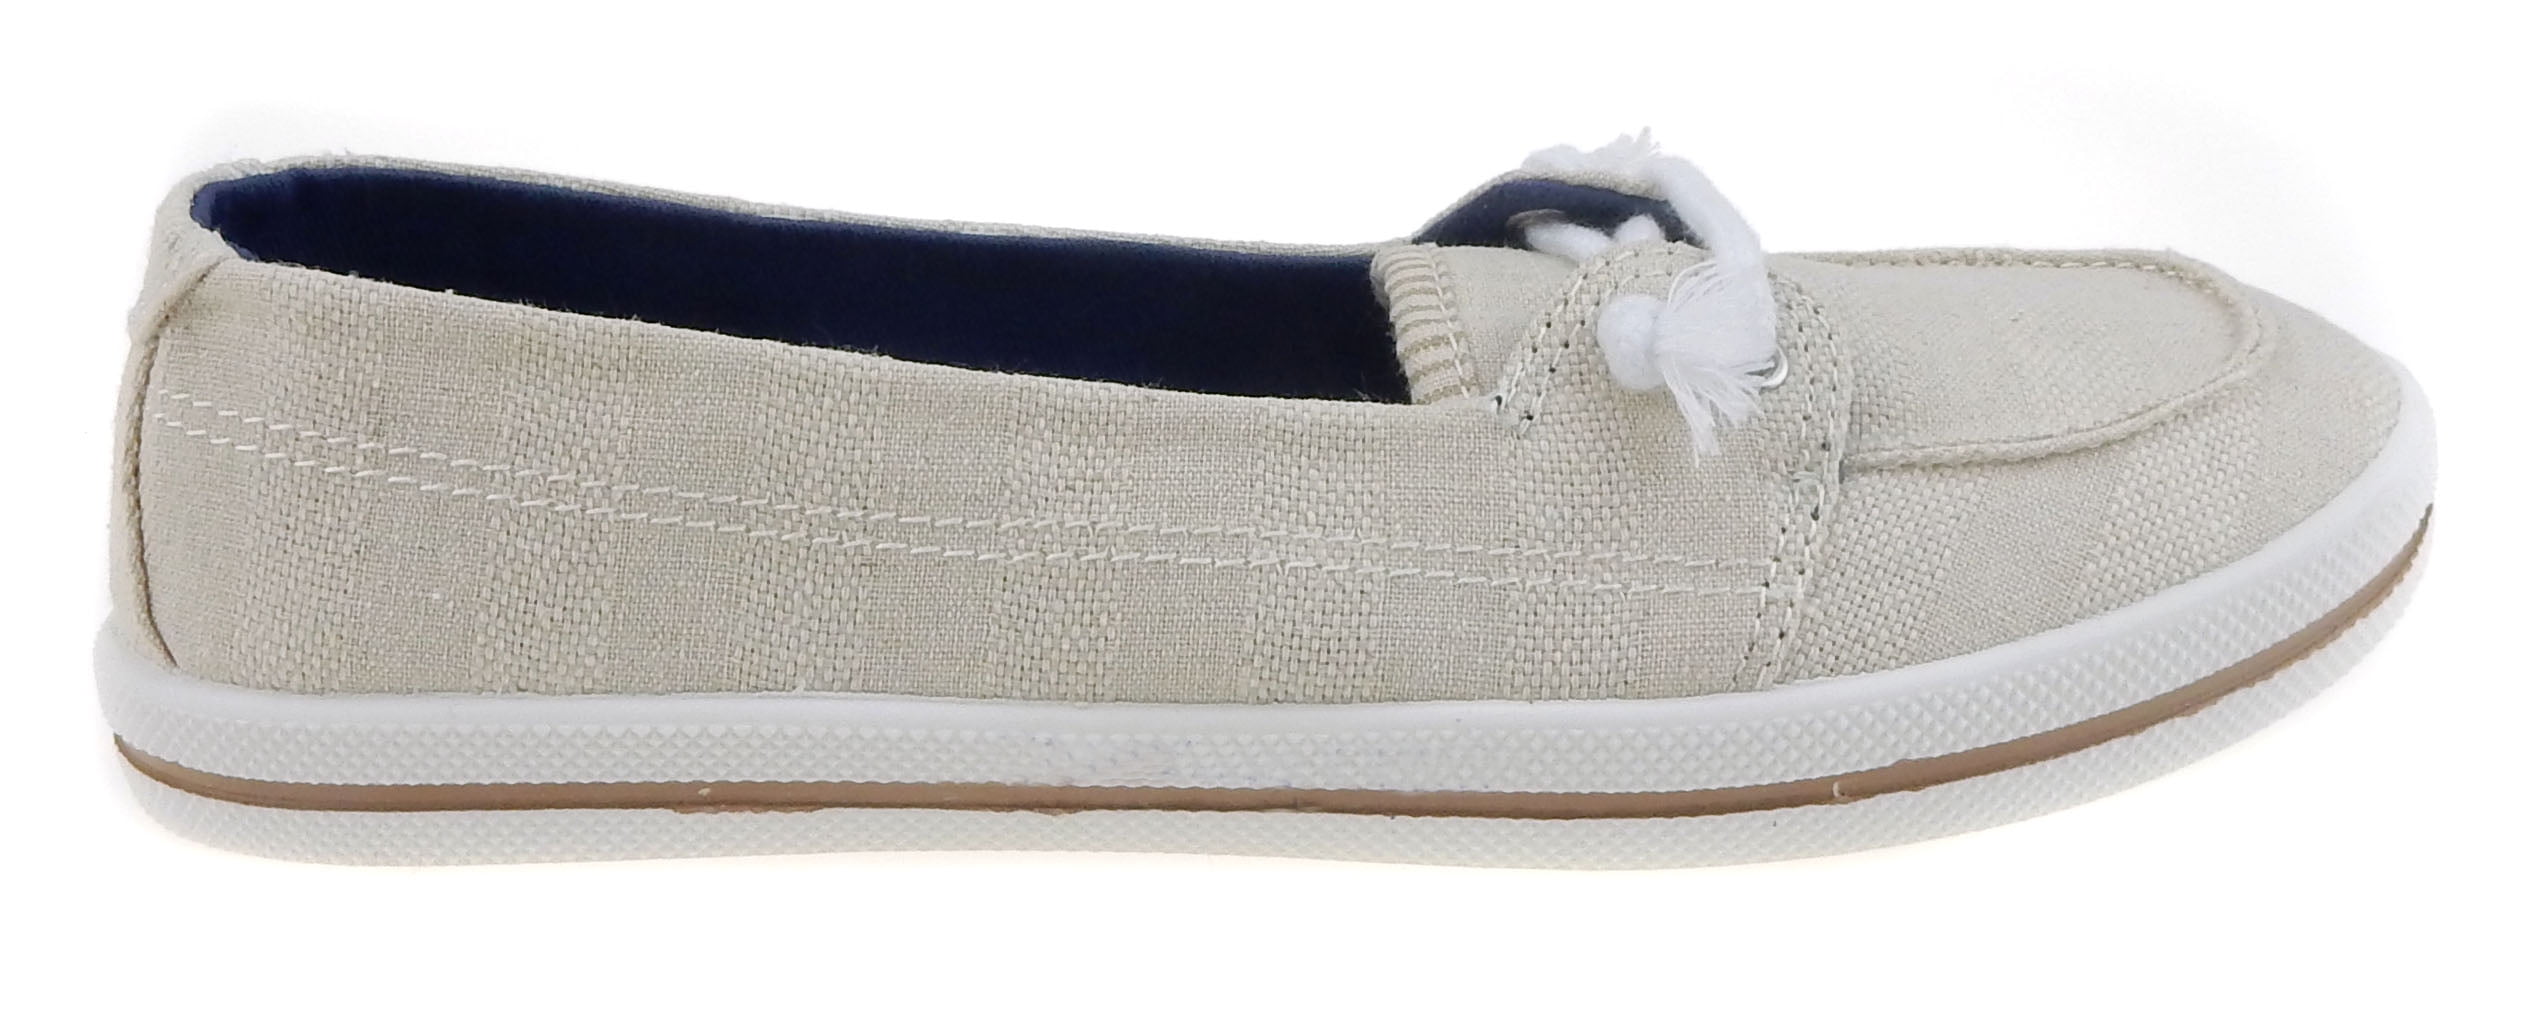 women's casual boat shoes